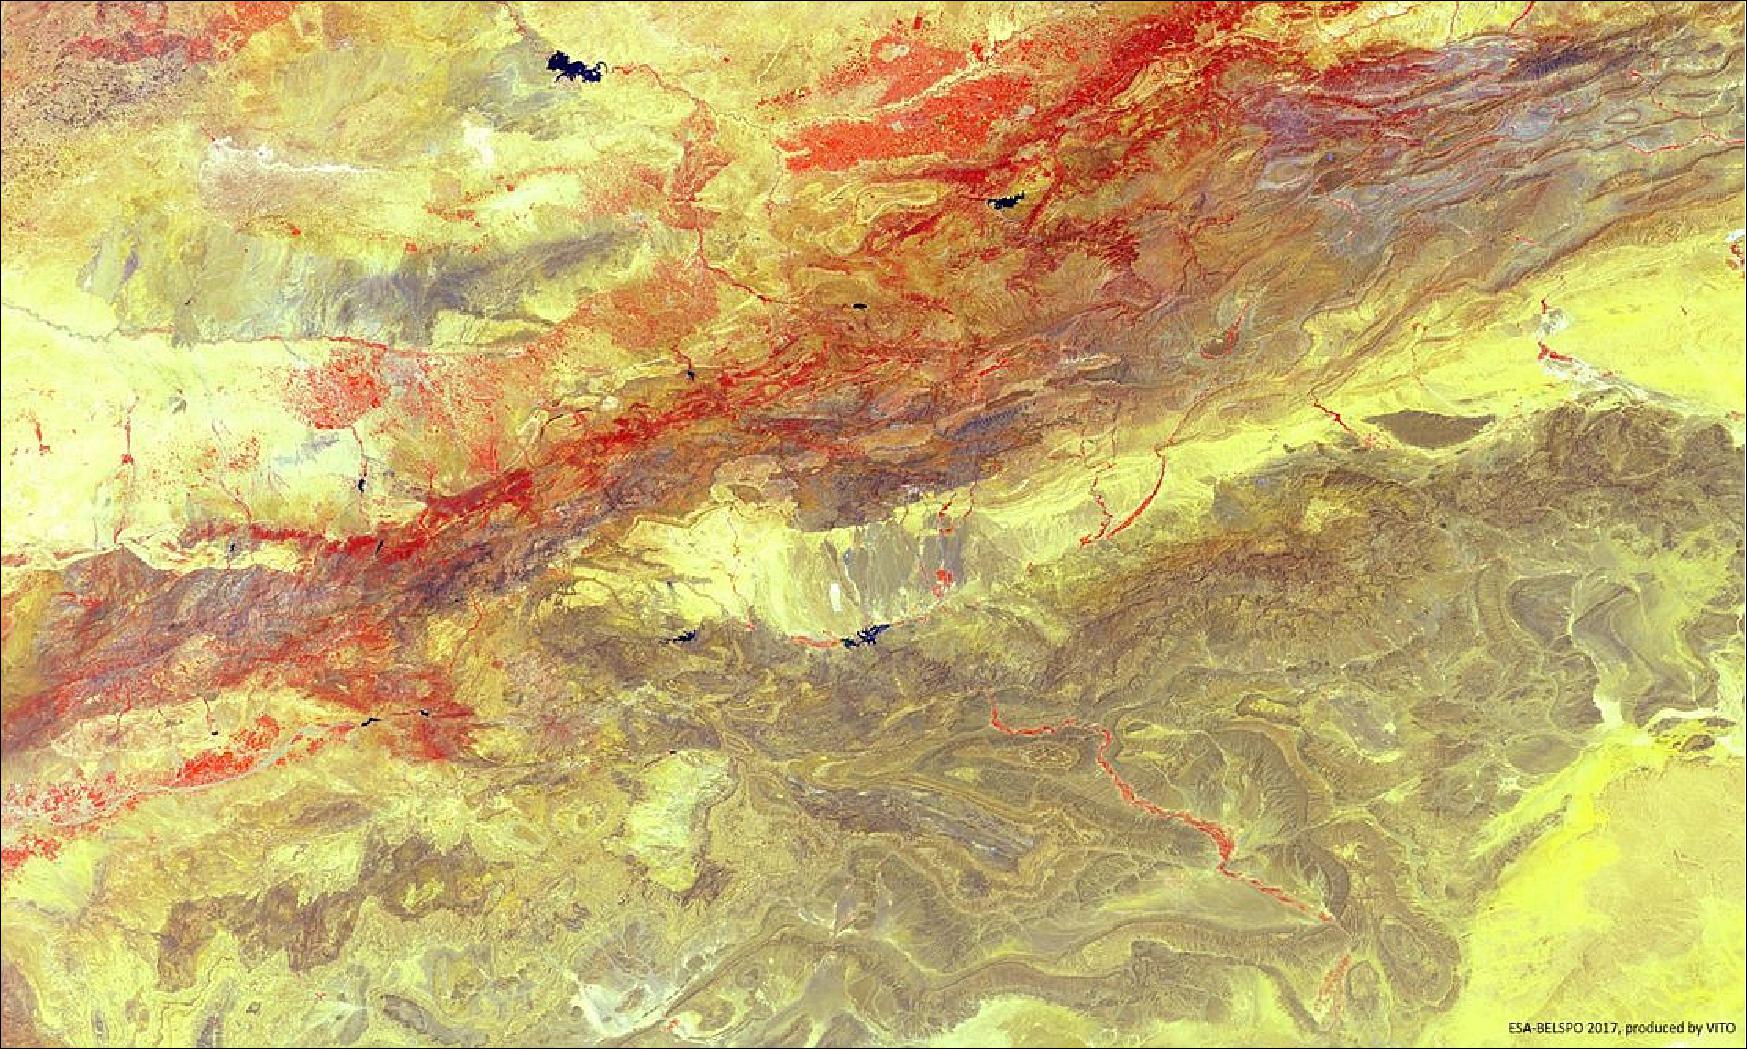 Figure 33: In the summer of 2017, ESA's PROBA-V minisatellite surveyed North Africa's Atlas mountains, bordering the Sahara (image credit: ESA/Belspo – produced by VITO)